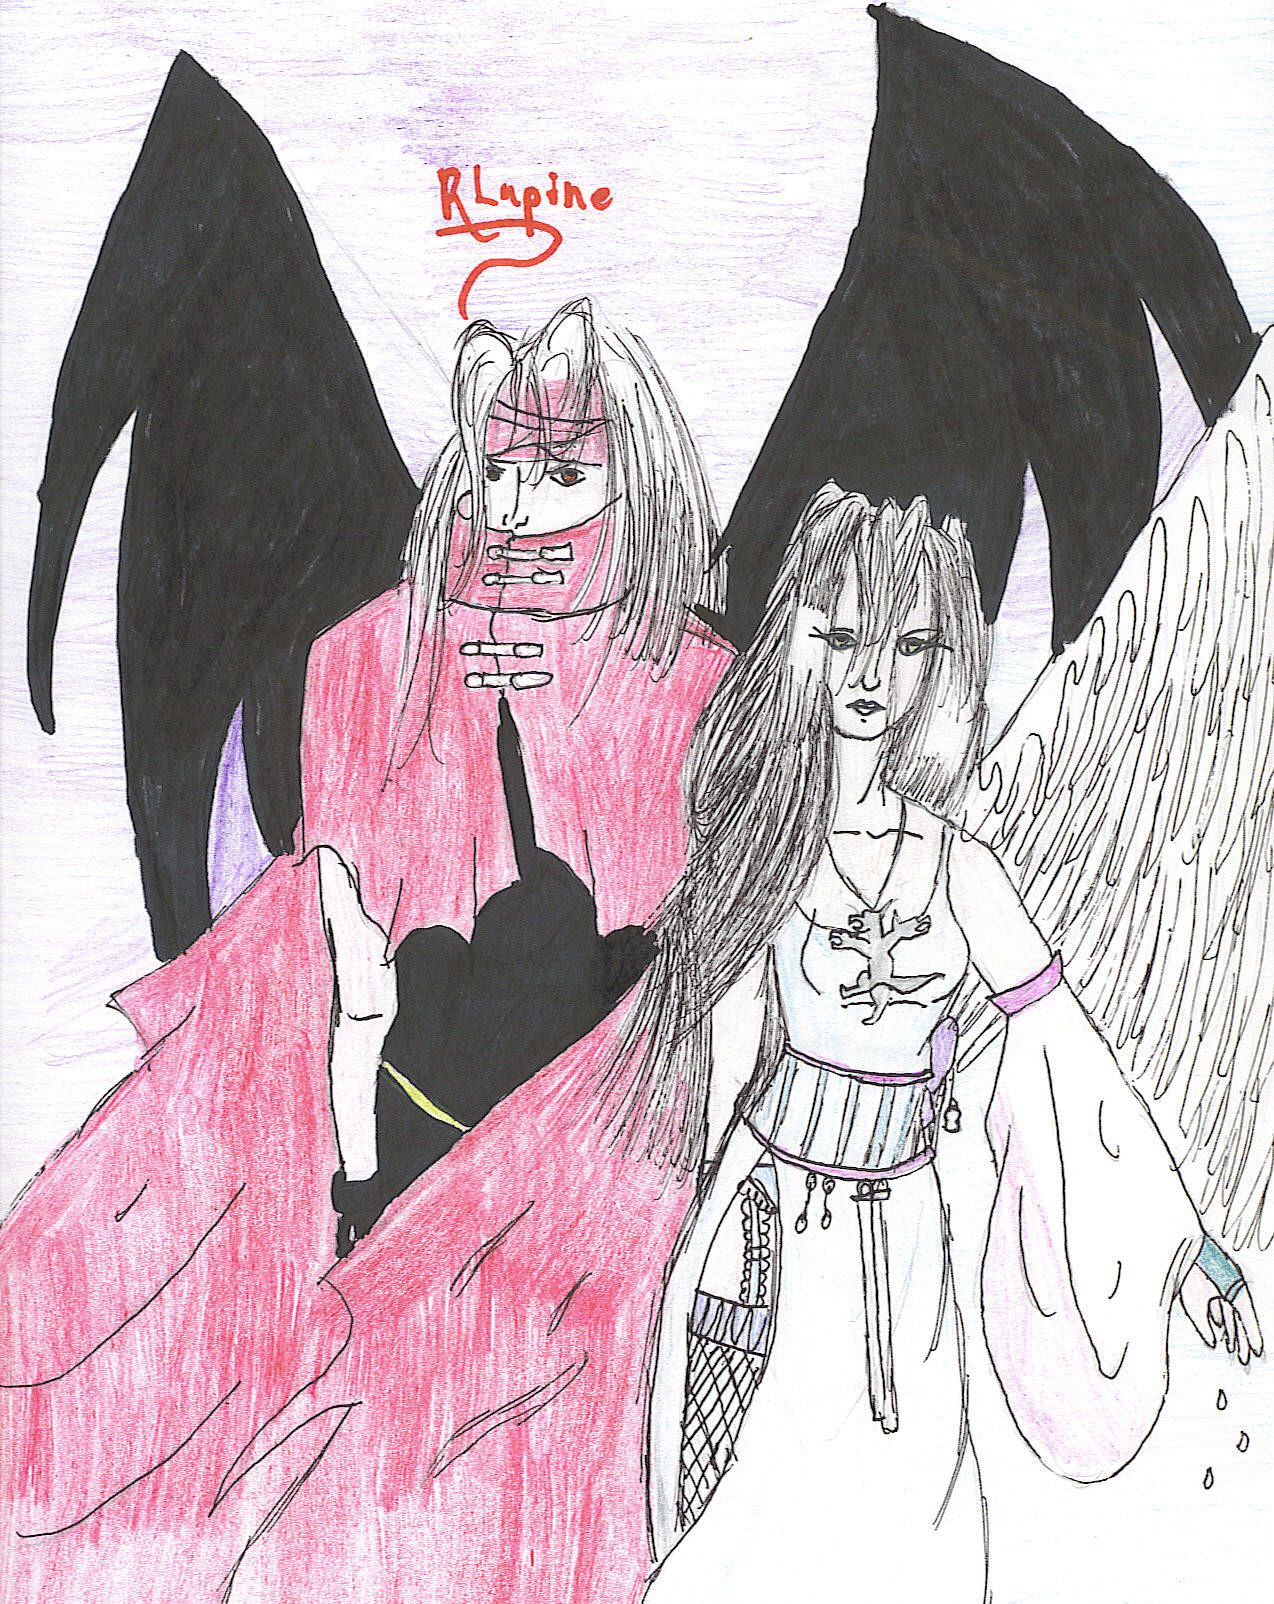 The Demon and the Angel by RingLupine